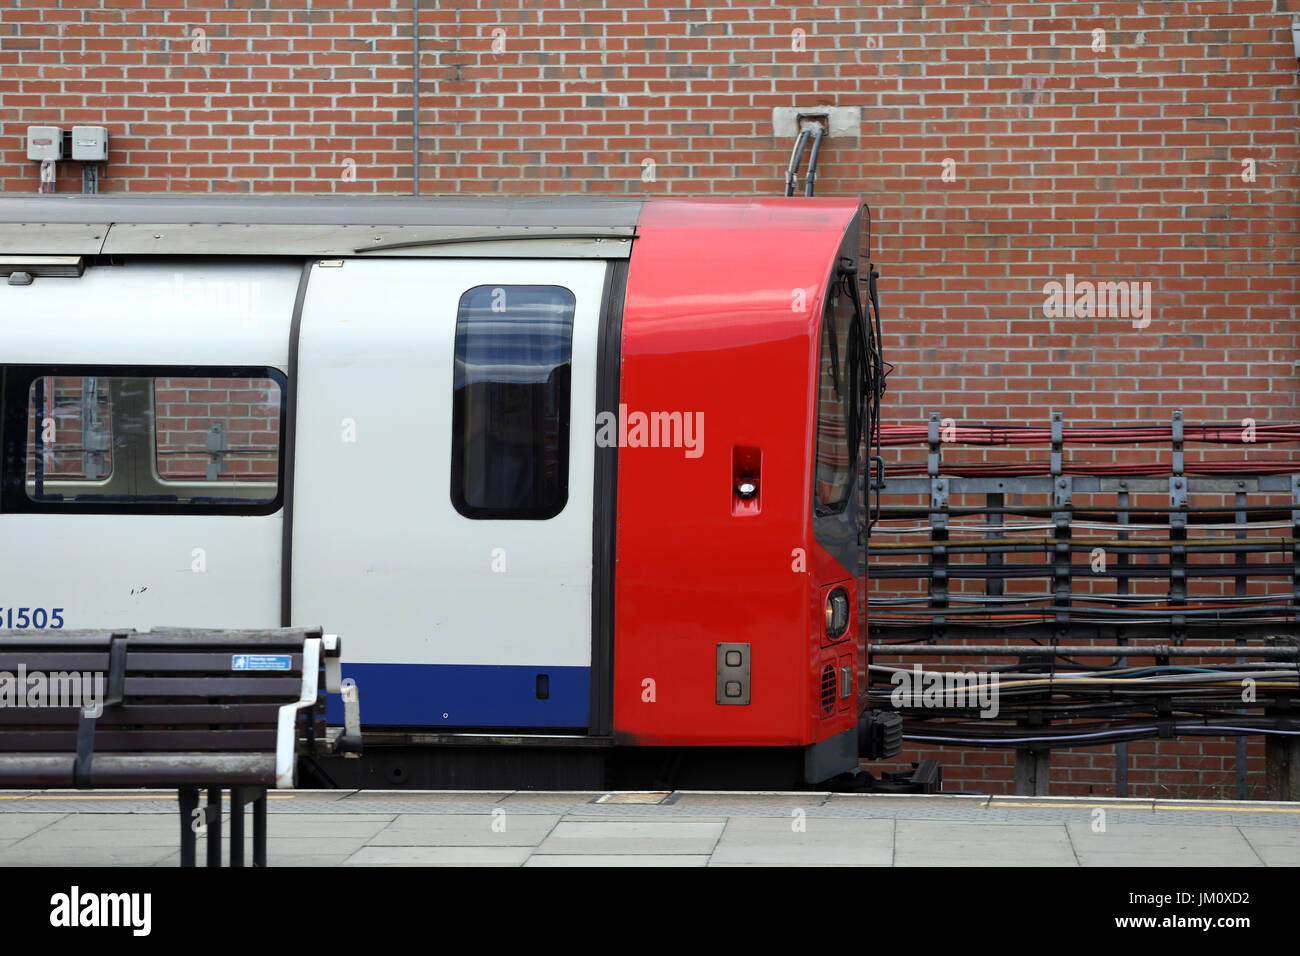 Front of tube train     Pic by Gavin Rodgers/Pixel 8000 Ltd Stock Photo